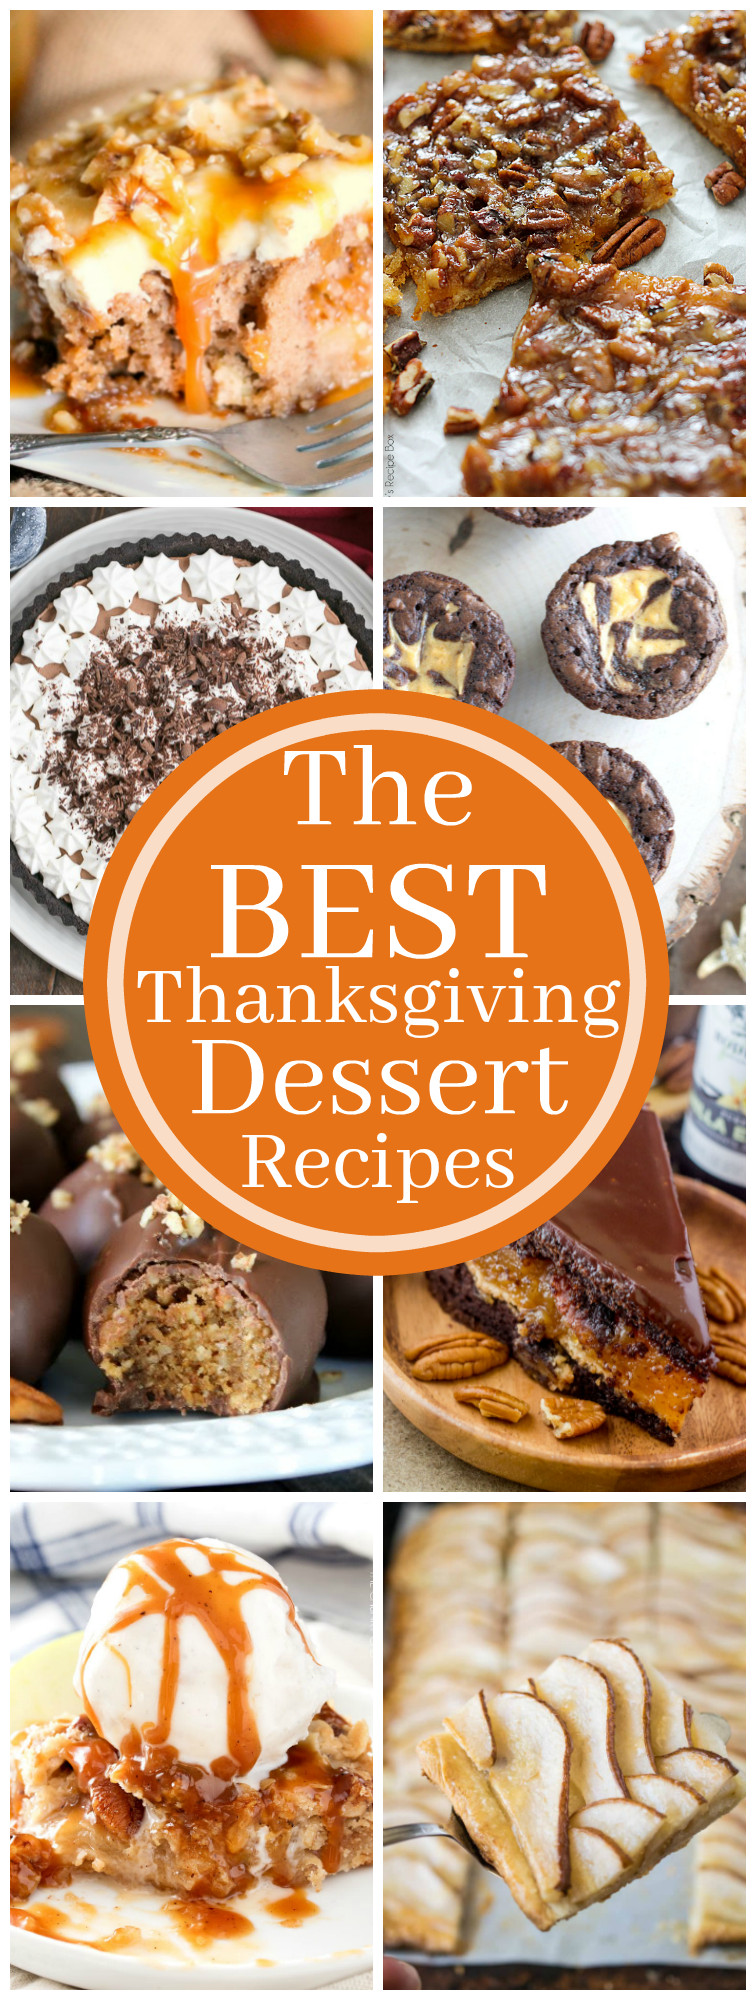 Thanksgiving Desserts Ideas
 The Best Thanksgiving Desserts Savory Experiments